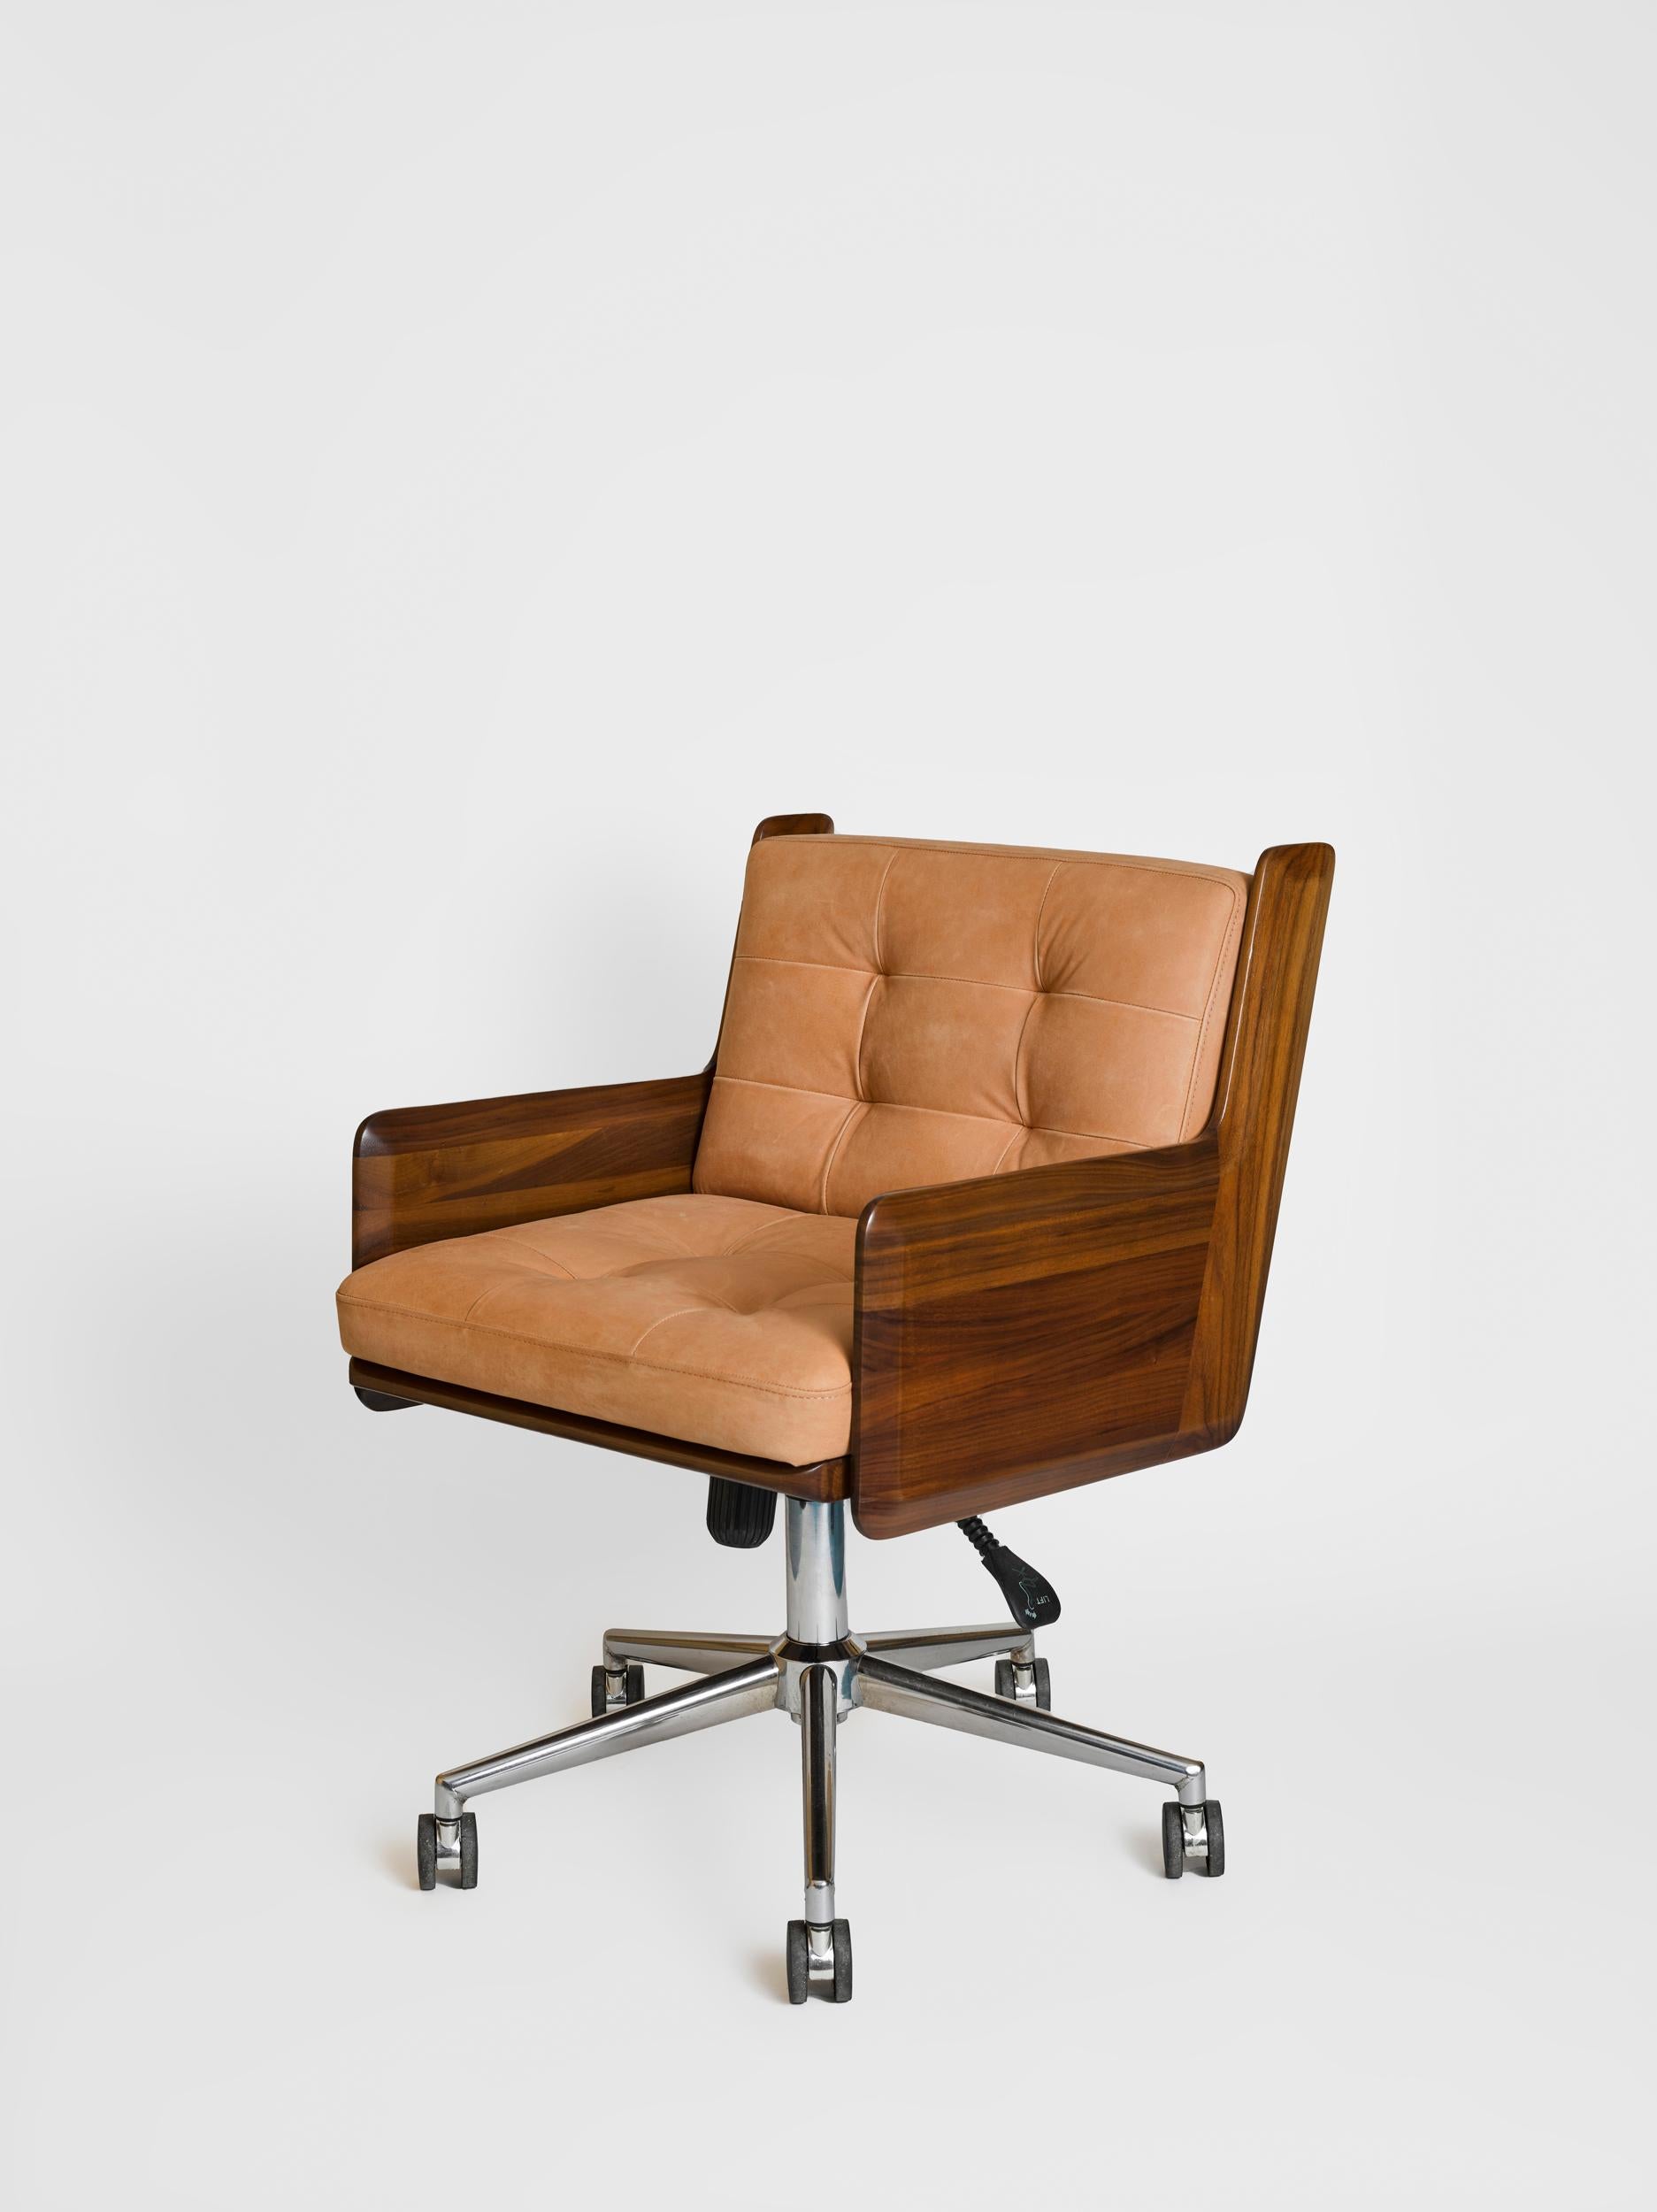 Darwin added wheels to the office chair in 19th century.
In the 1970s ergonomics was added to design criteria.
Today, it is the key element for whom spends long hours in the office.
Office chair consists a solid plywood body, leather upholstery and